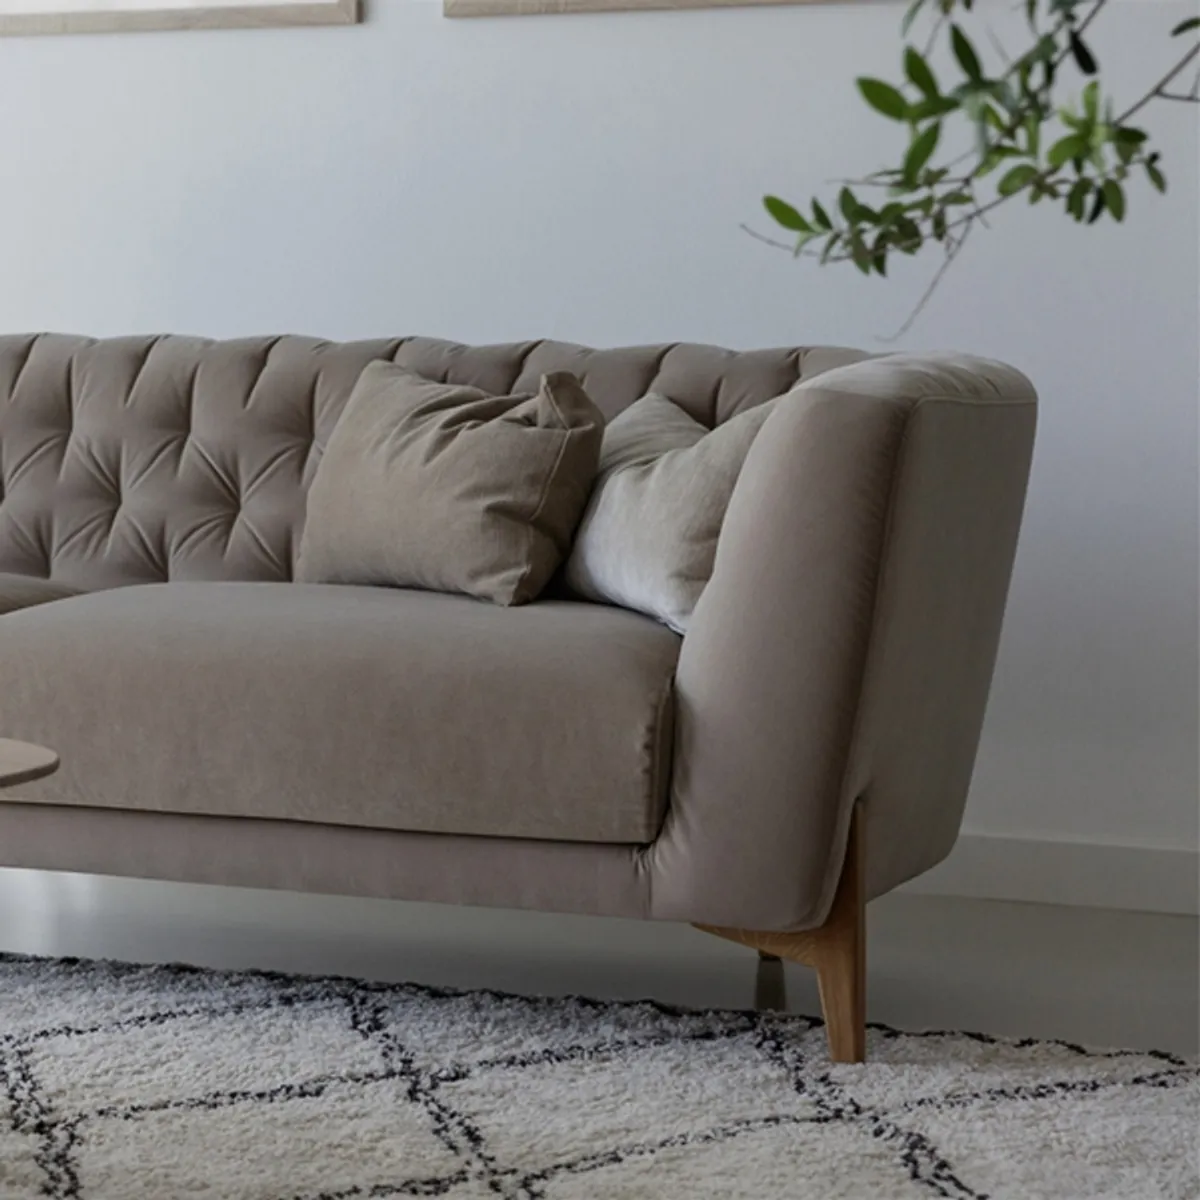 Yasmin sofa Inside Out Contracts5